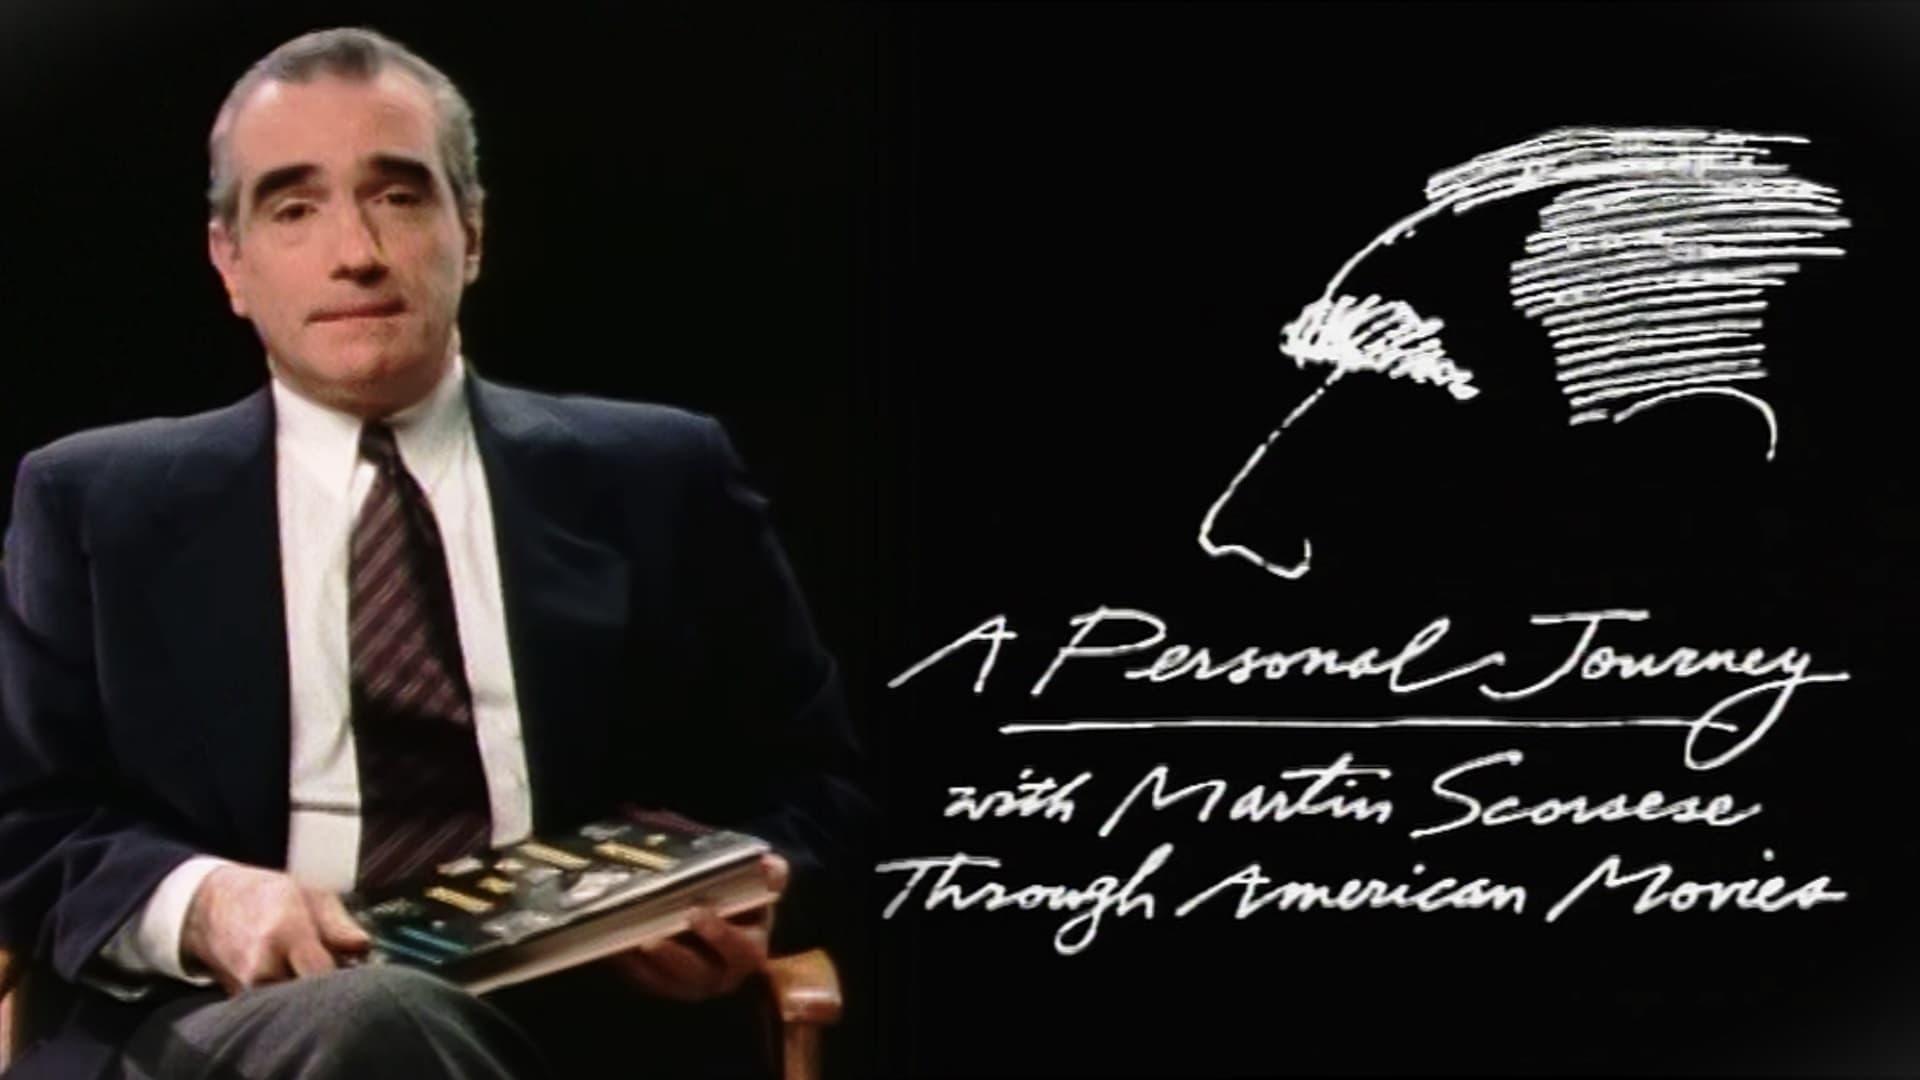 A Personal Journey with Martin Scorsese Through American Movies backdrop